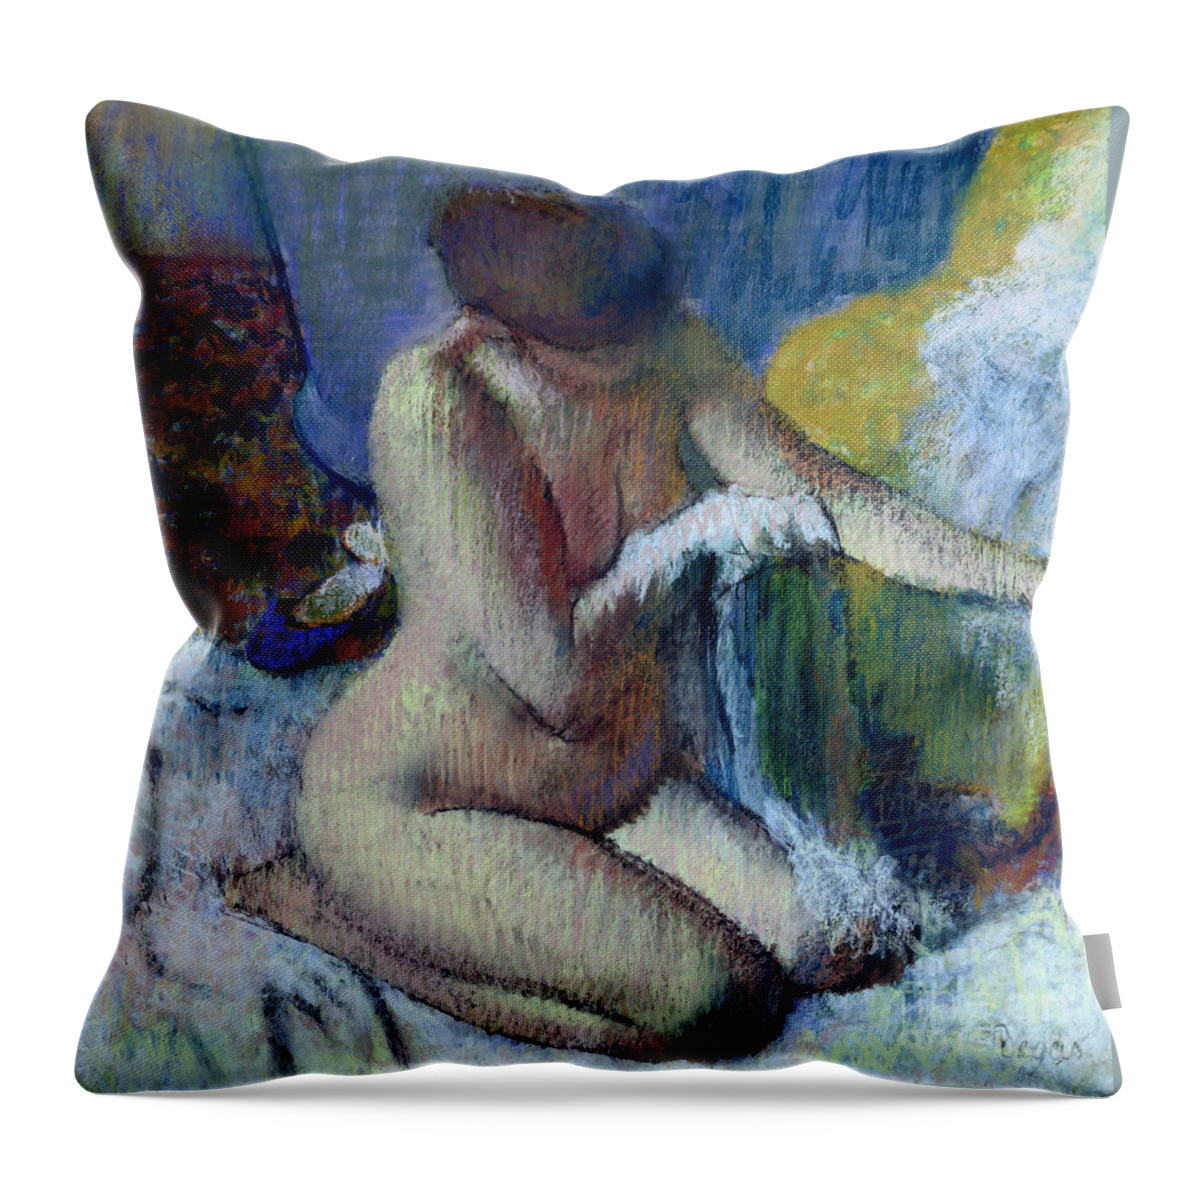 After Throw Pillow featuring the painting After the Bath by Edgar Degas